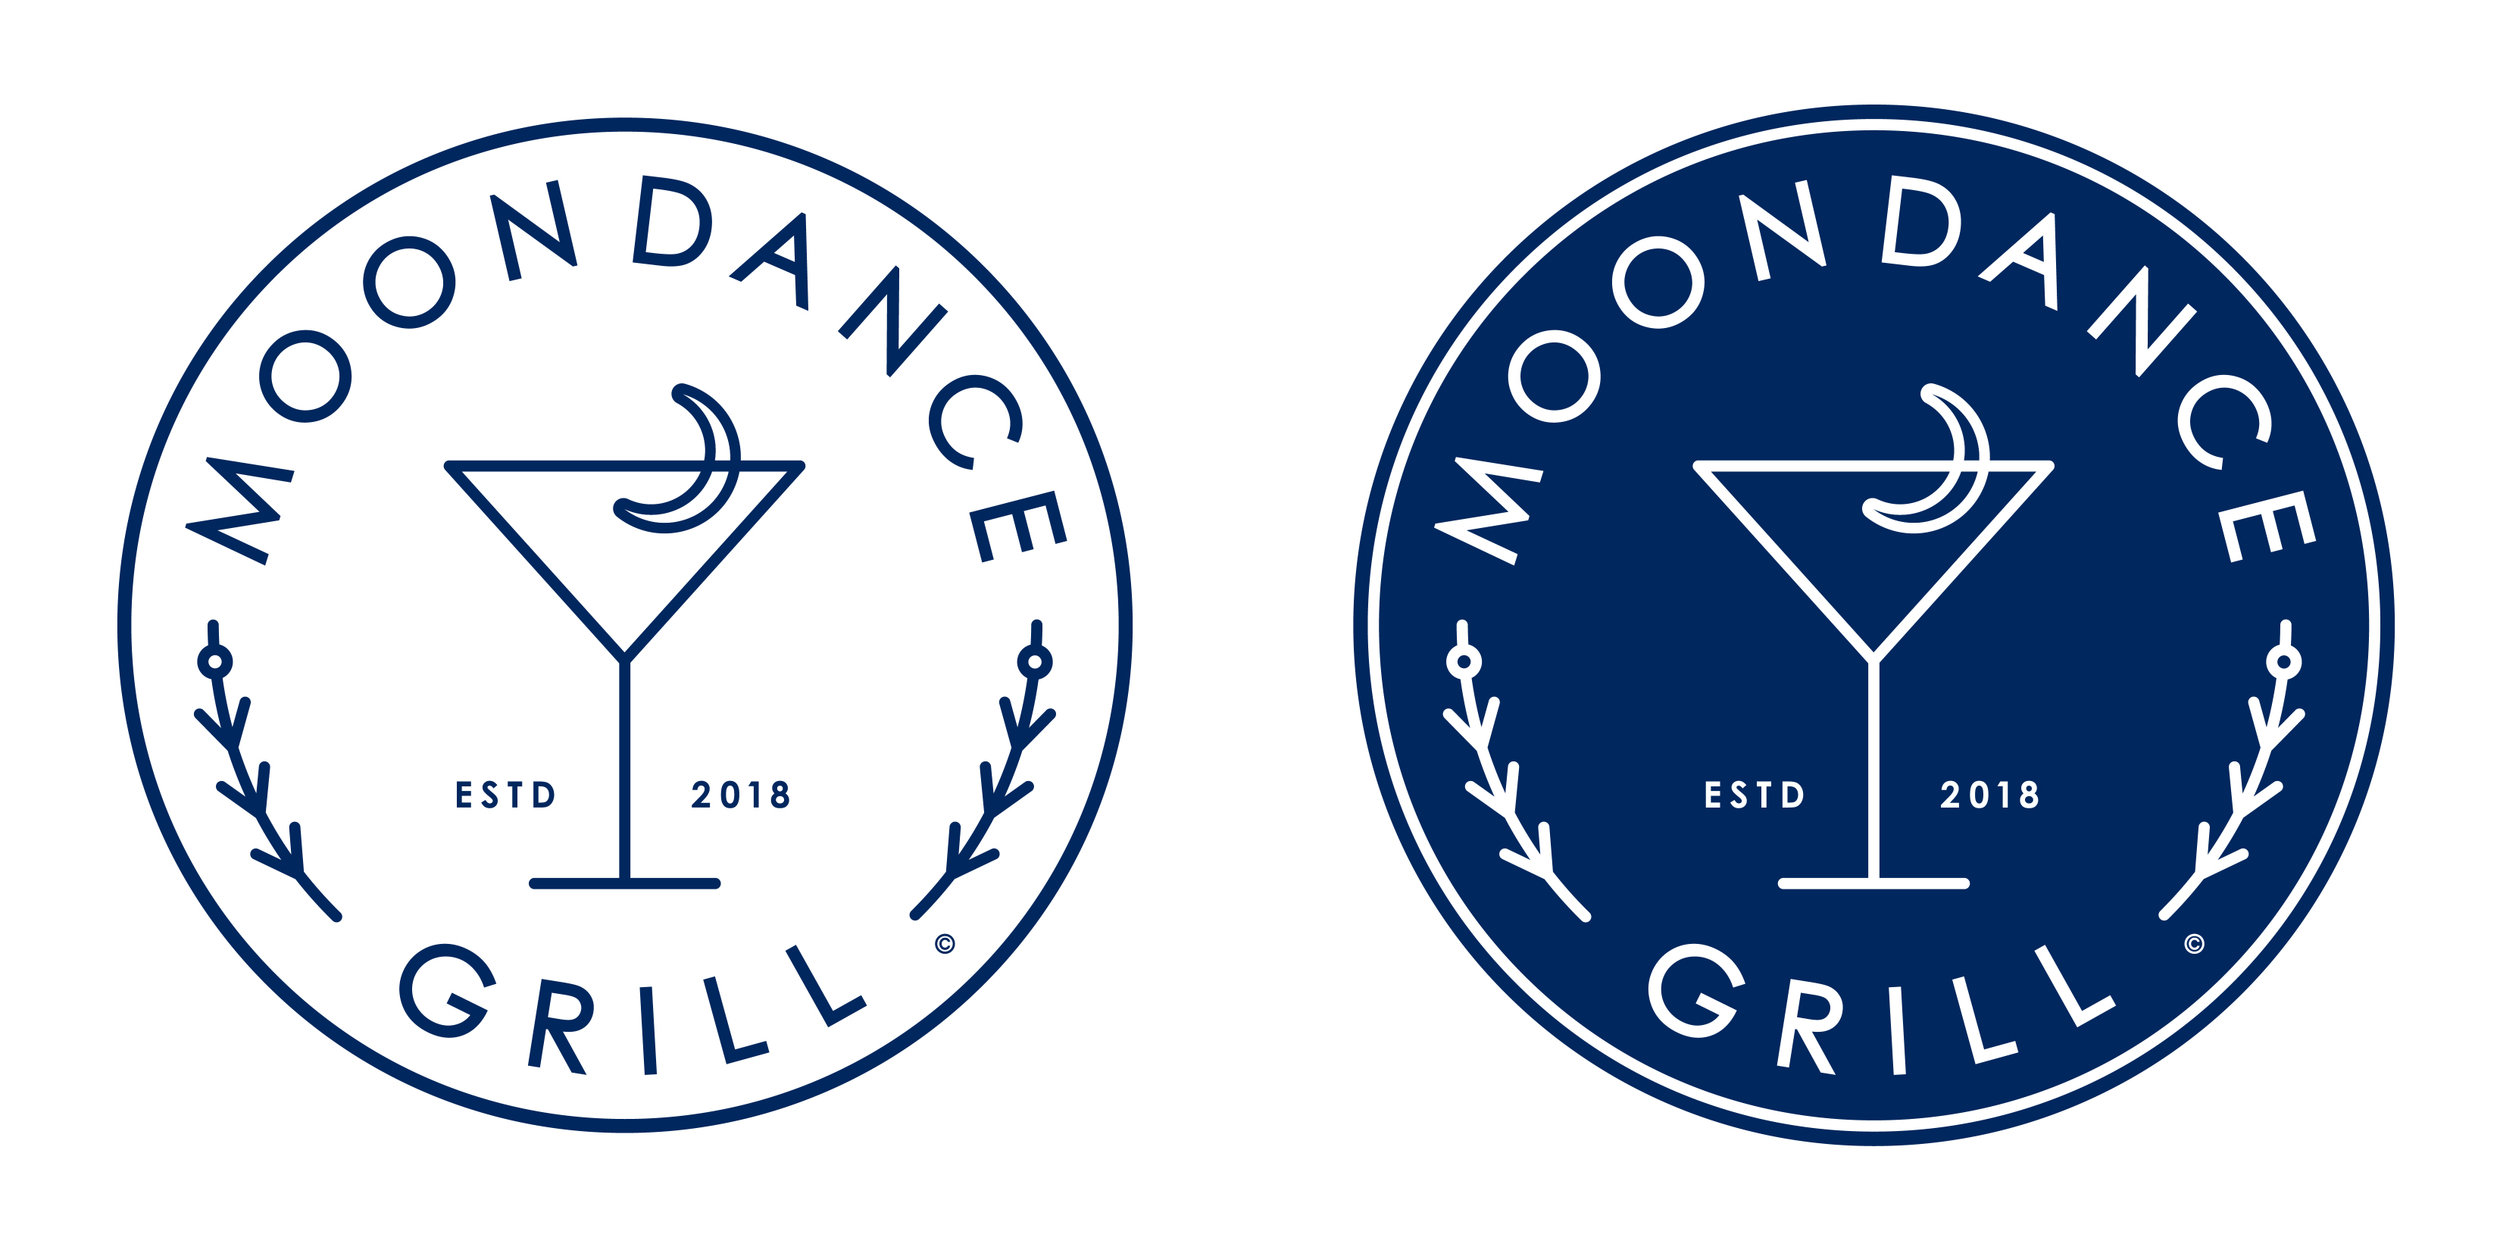  Moondance Grill Germantown Thornwood Prototype Logos  for Tommy Peters, Beale Street Blues Company Memphis  Name development, branding creative and design by Chuck Mitchell 